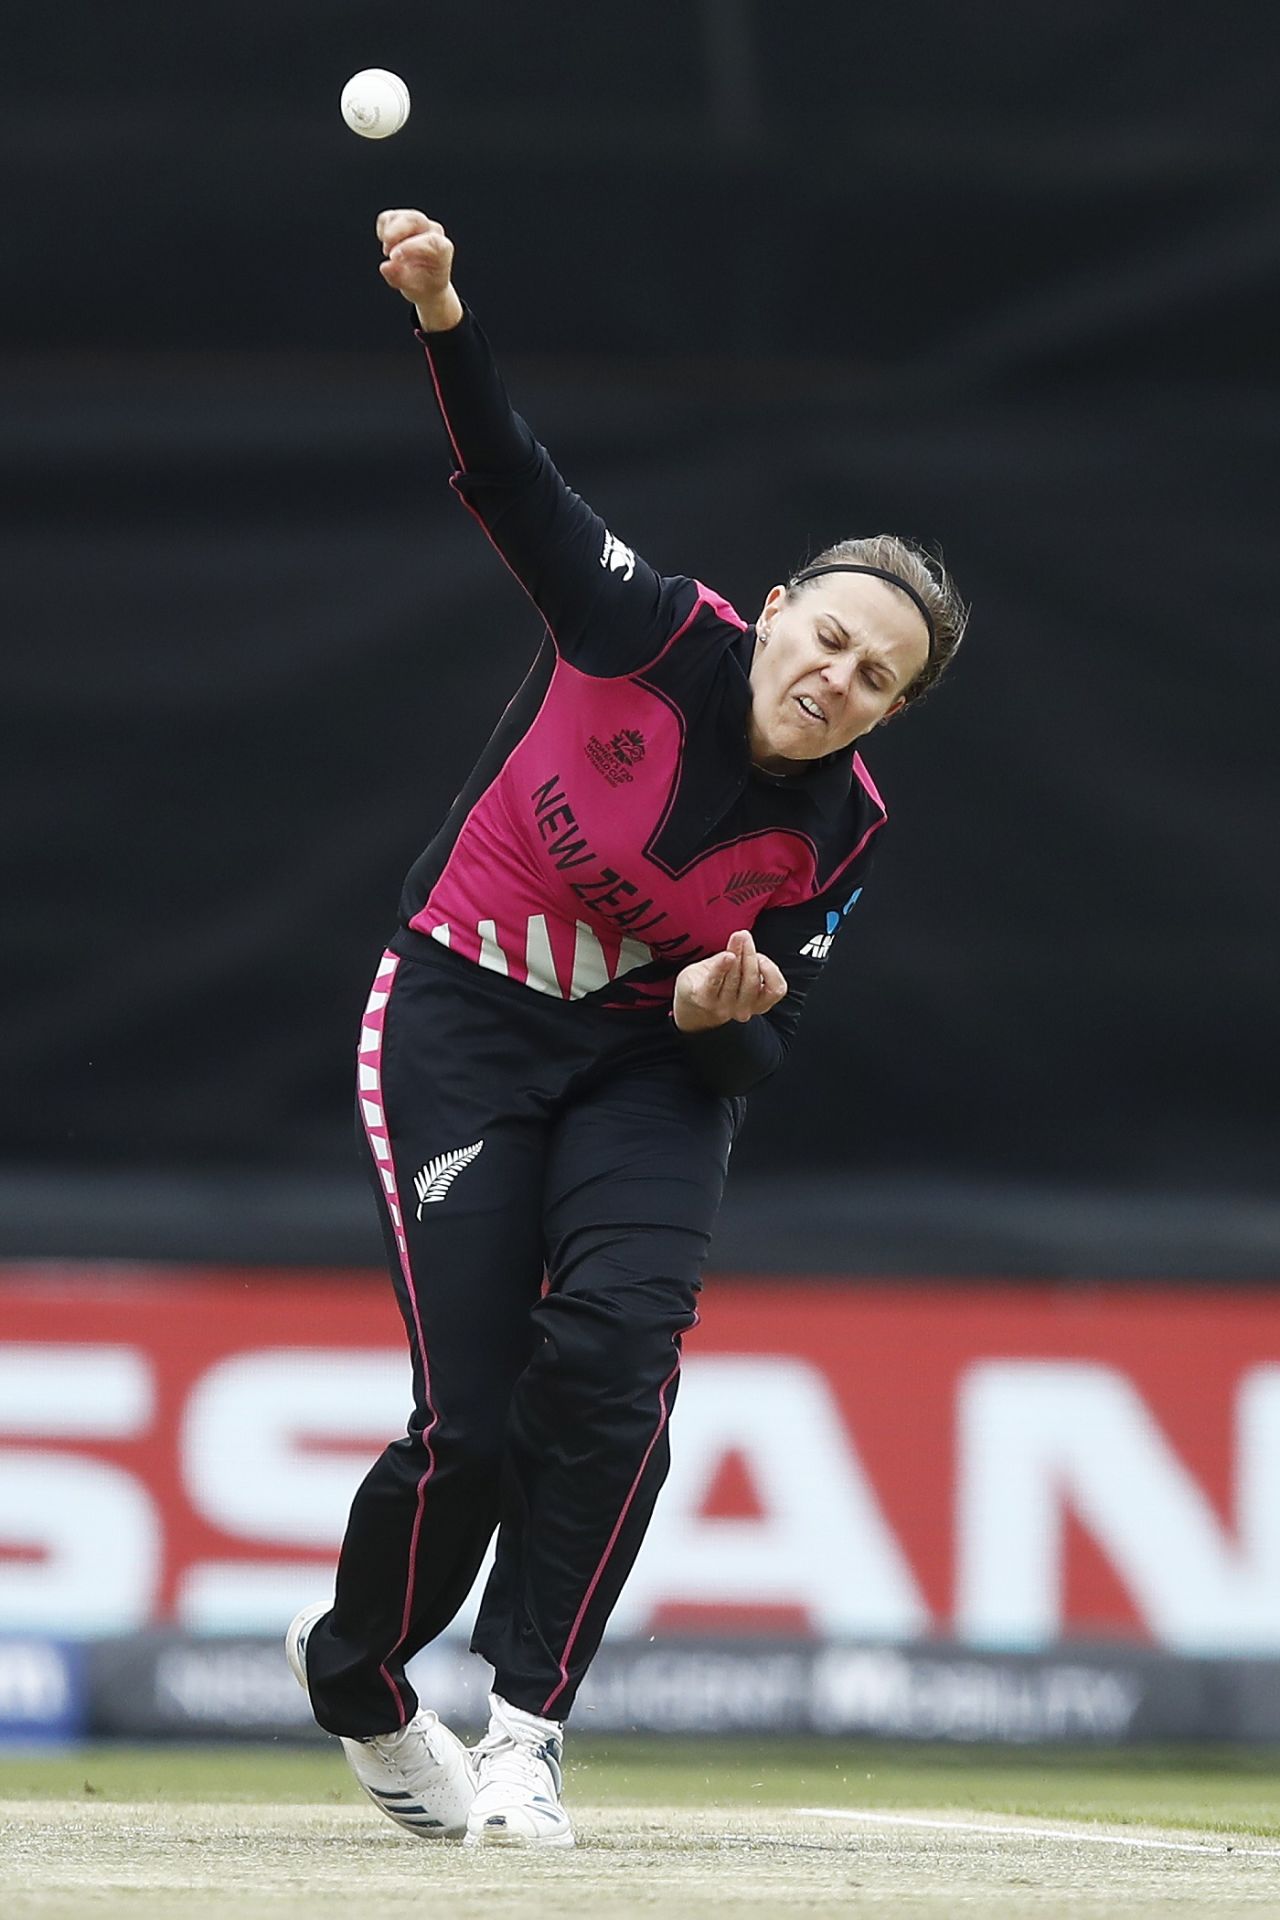 Lea Tahuhu struck early for New Zealand, India v New Zealand,  ICC Women's T20 World Cup, Melbourne (Junction Oval), February 27, 2020